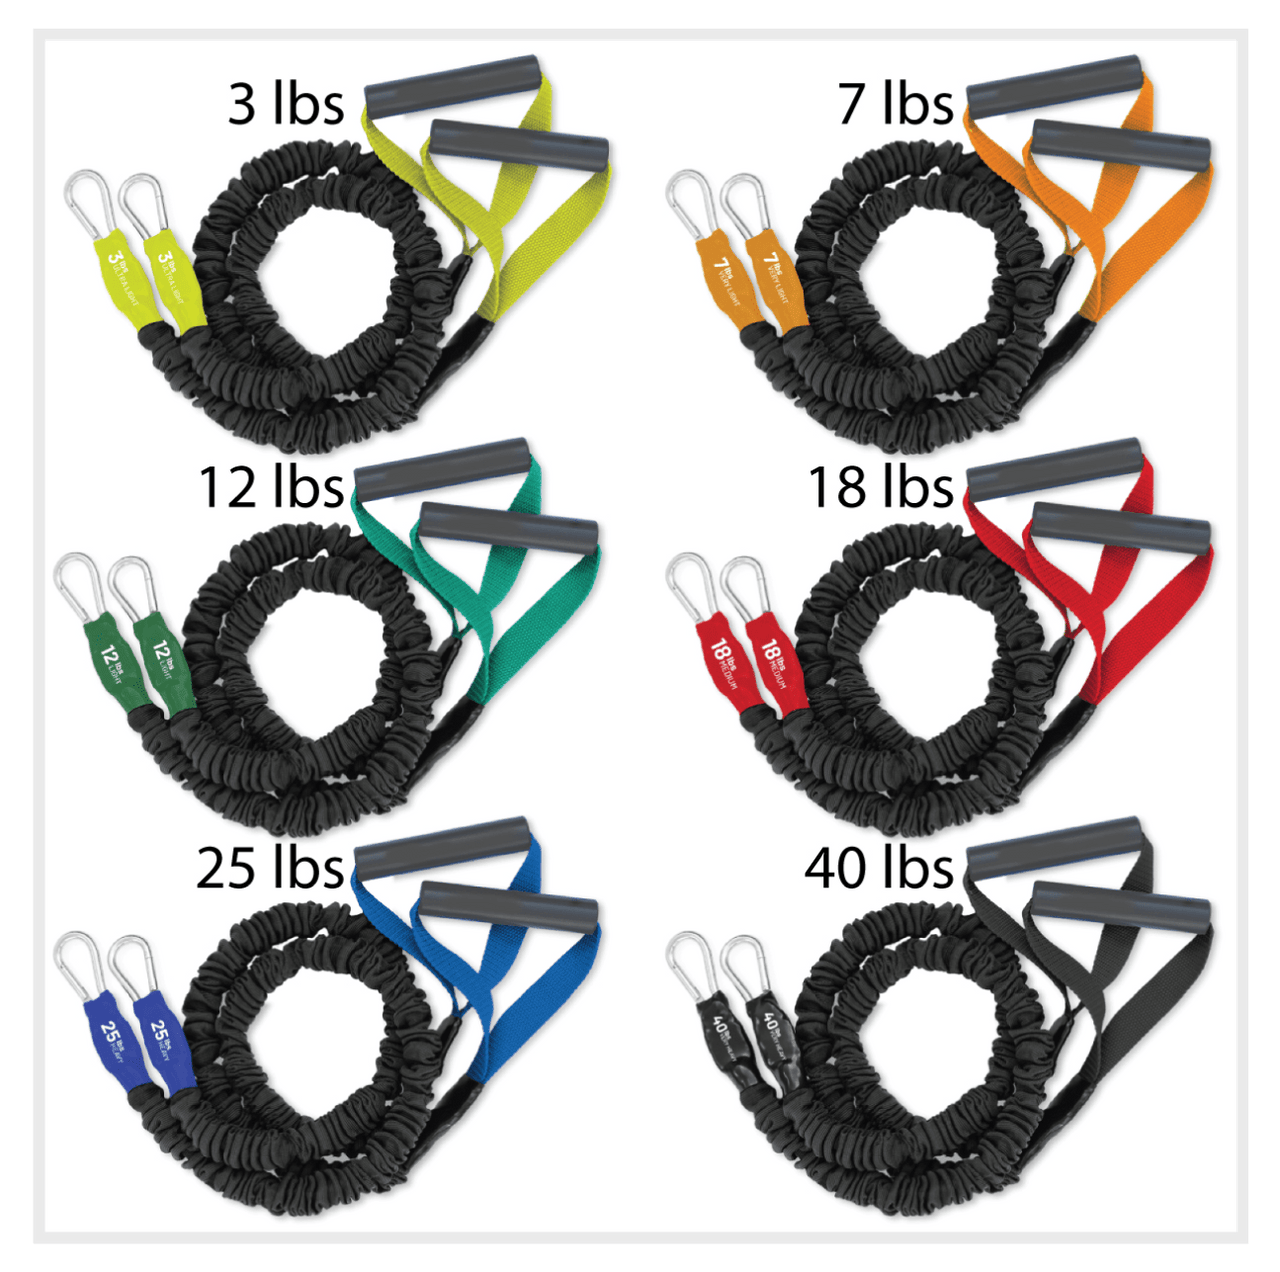 X-Over Shoulder and Arm Resistance Bands- 6 Pack (3lb/7lb/12lb/18lb/25lb/40lb) - FitCord Resistance Bands american made covered resistance bands for upper body workout. Best bands on the market for at home, in crossfit box, or gym workout. Compare to Crossover Symmetry and 4kor